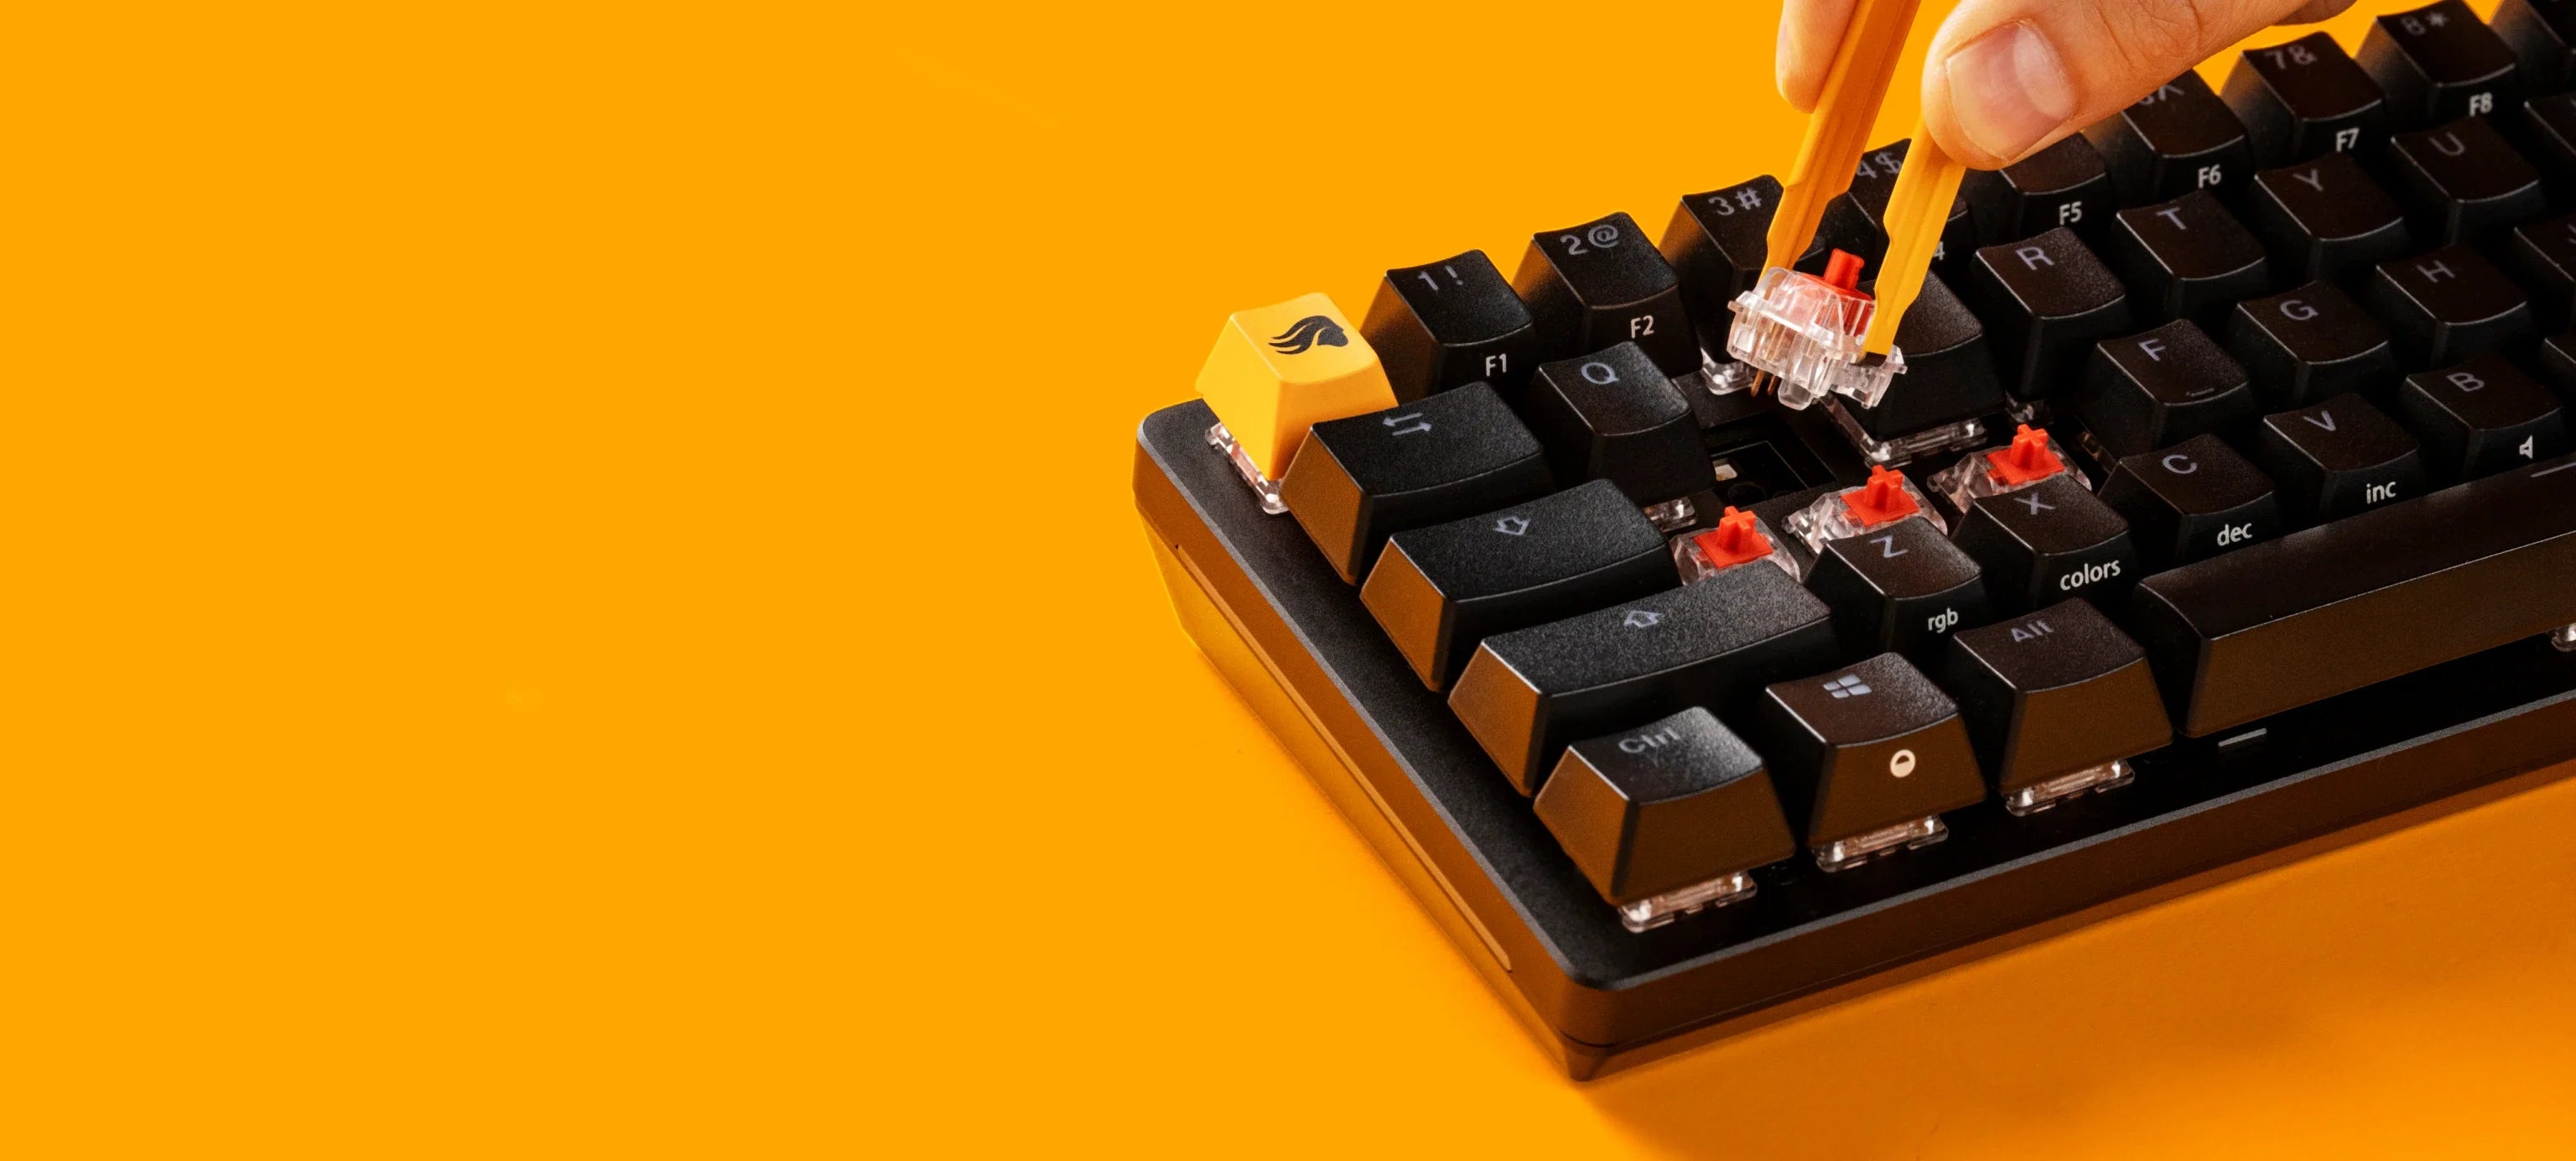 GMMK 2 Black Keyboard having switch removed with a switch puller on an orange background